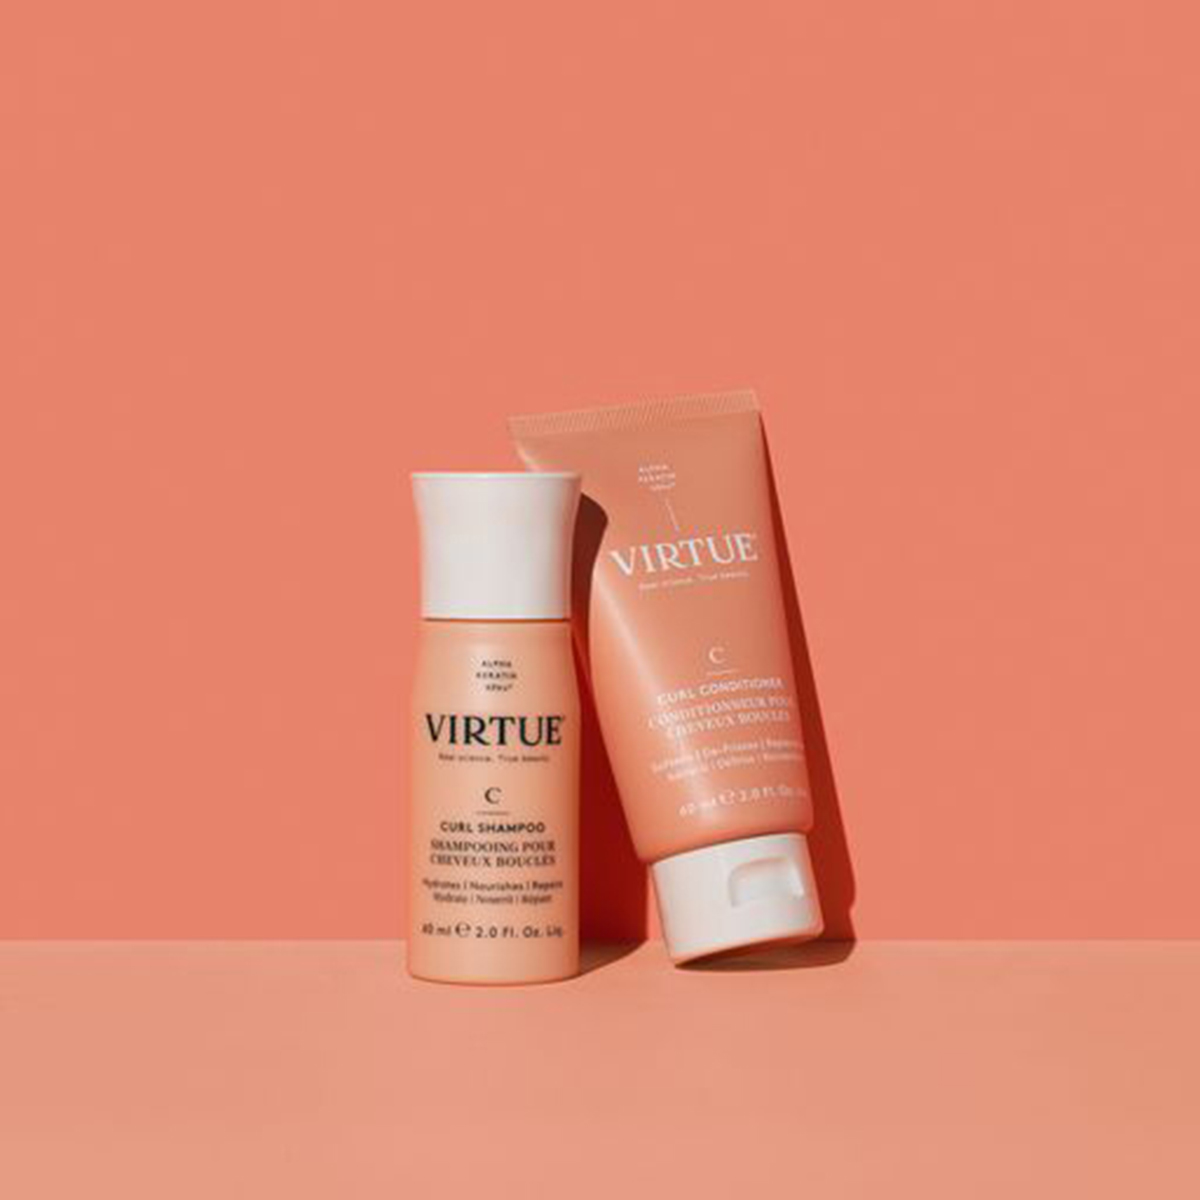 Virtue - Curl Conditioner Travel Size